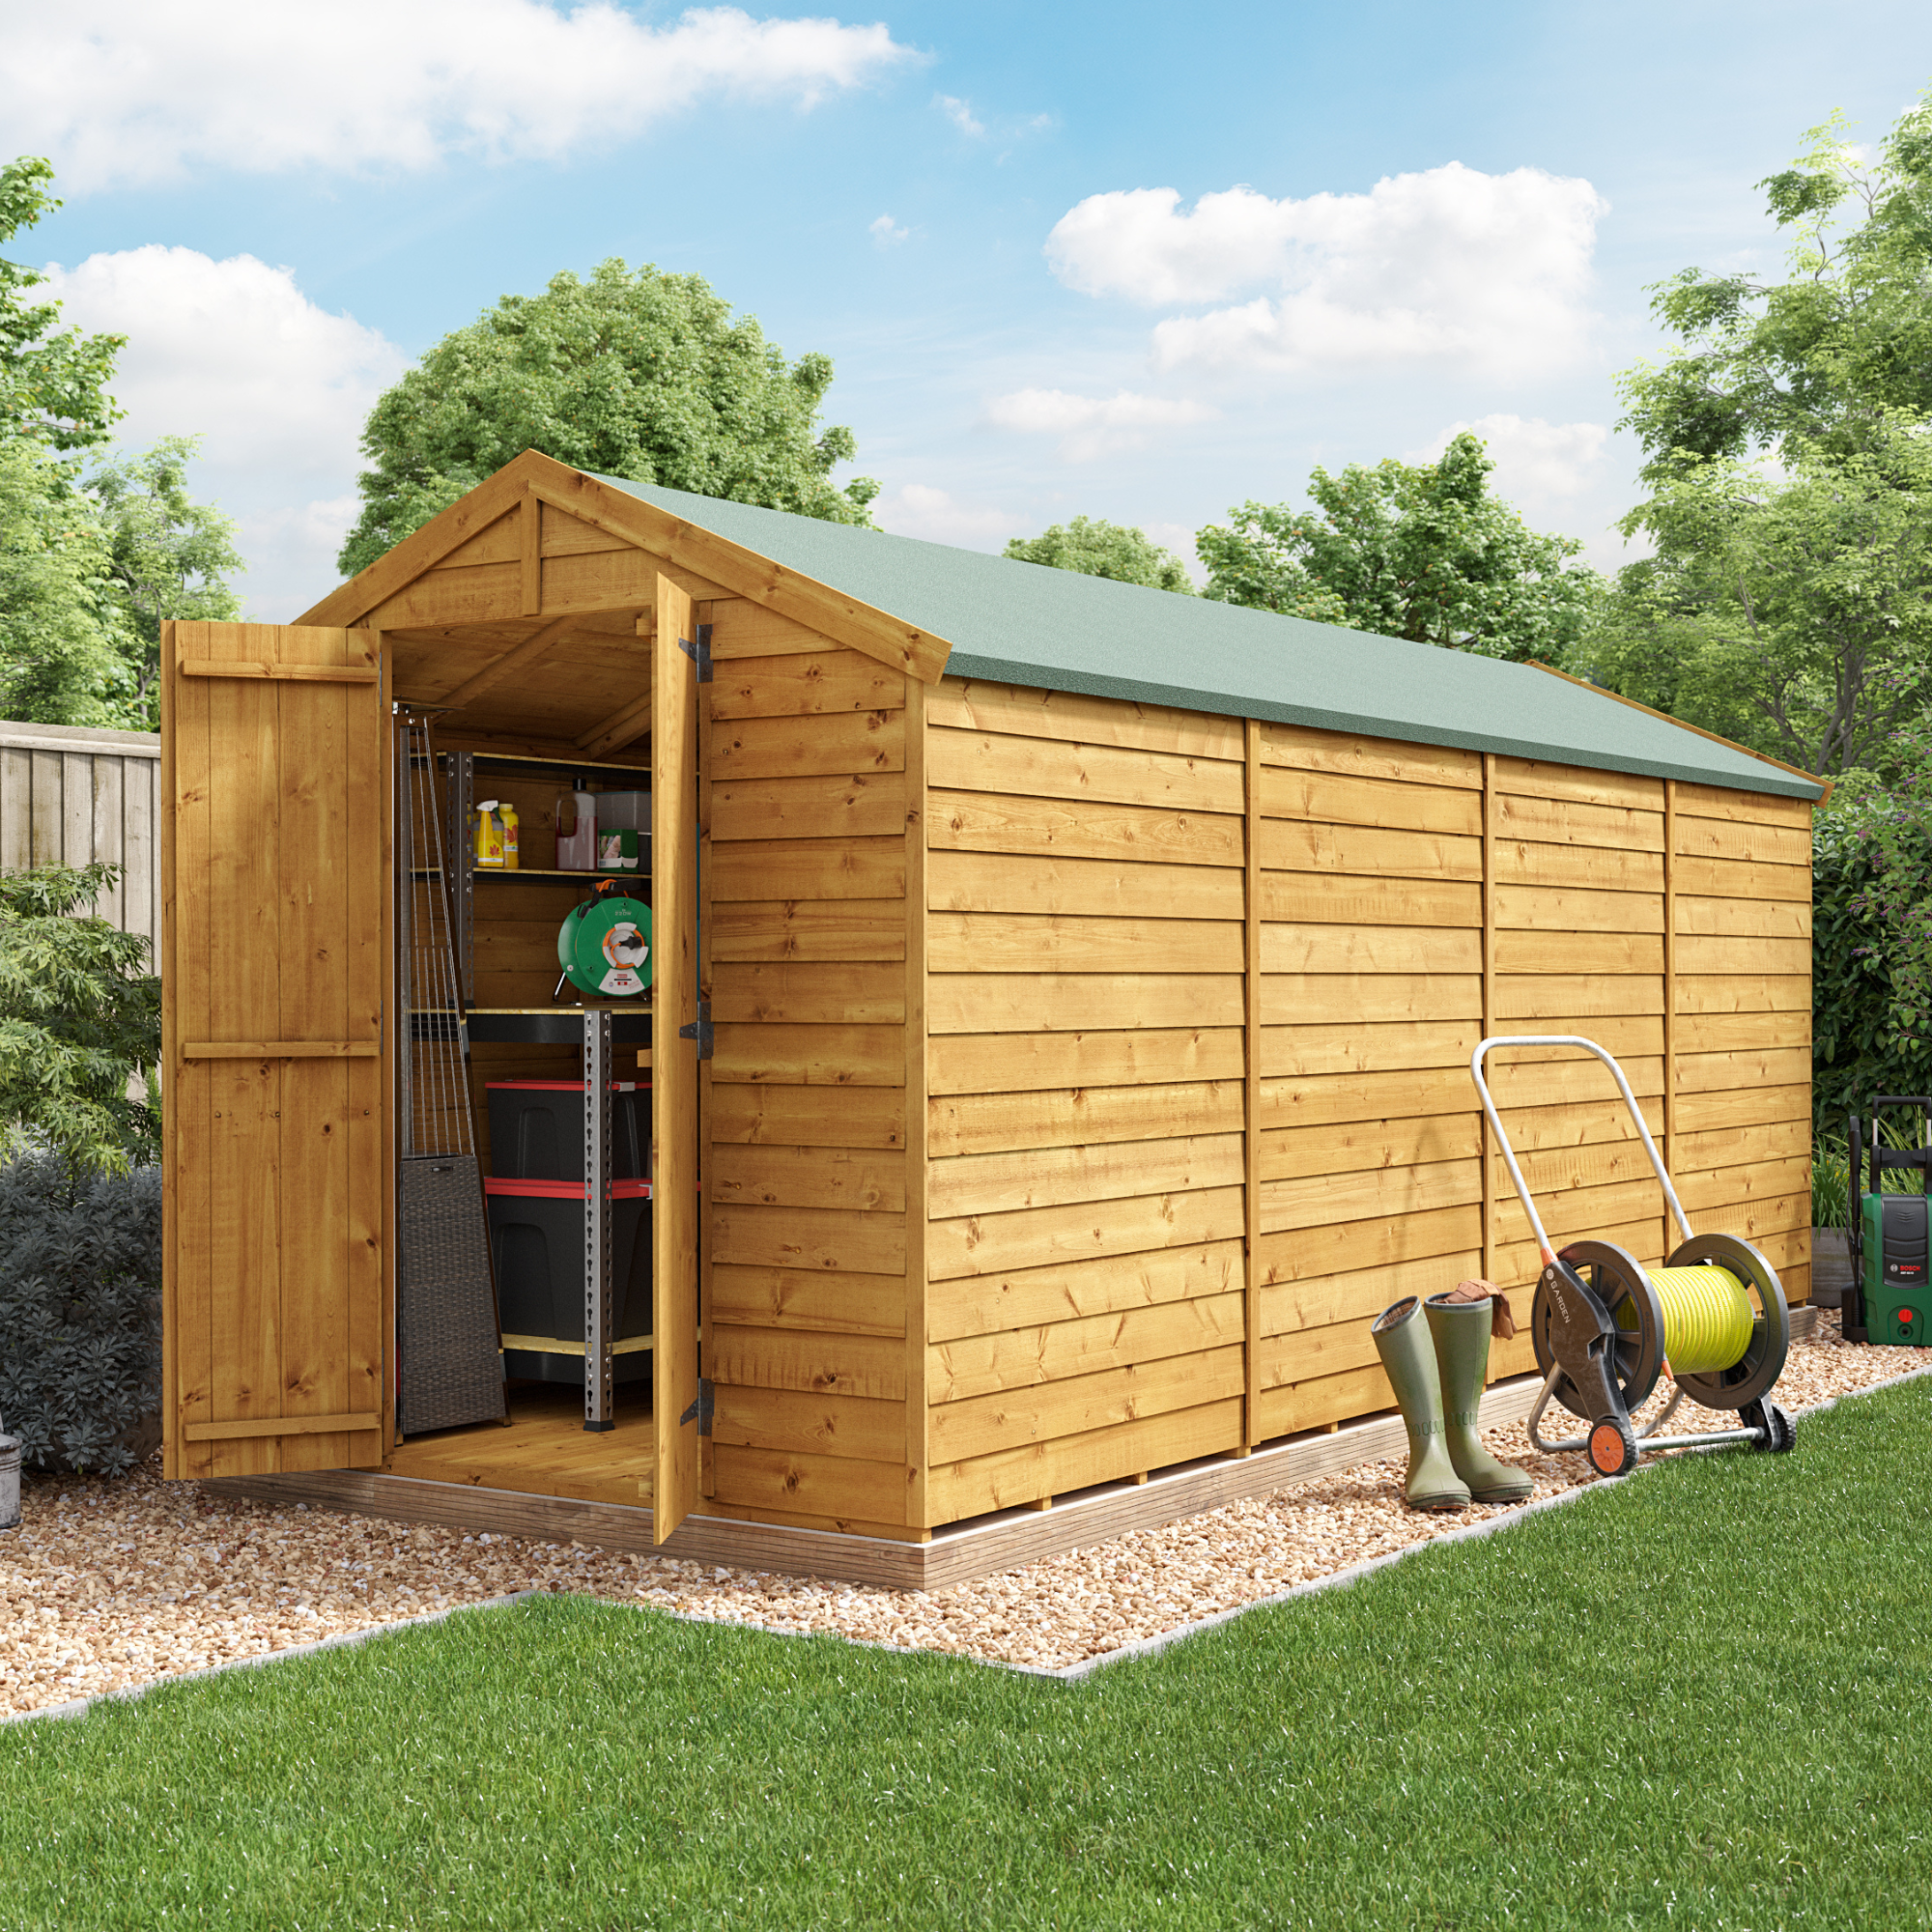 BillyOh Keeper Overlap Apex Shed - 16x6 Overlap Apex Windowless